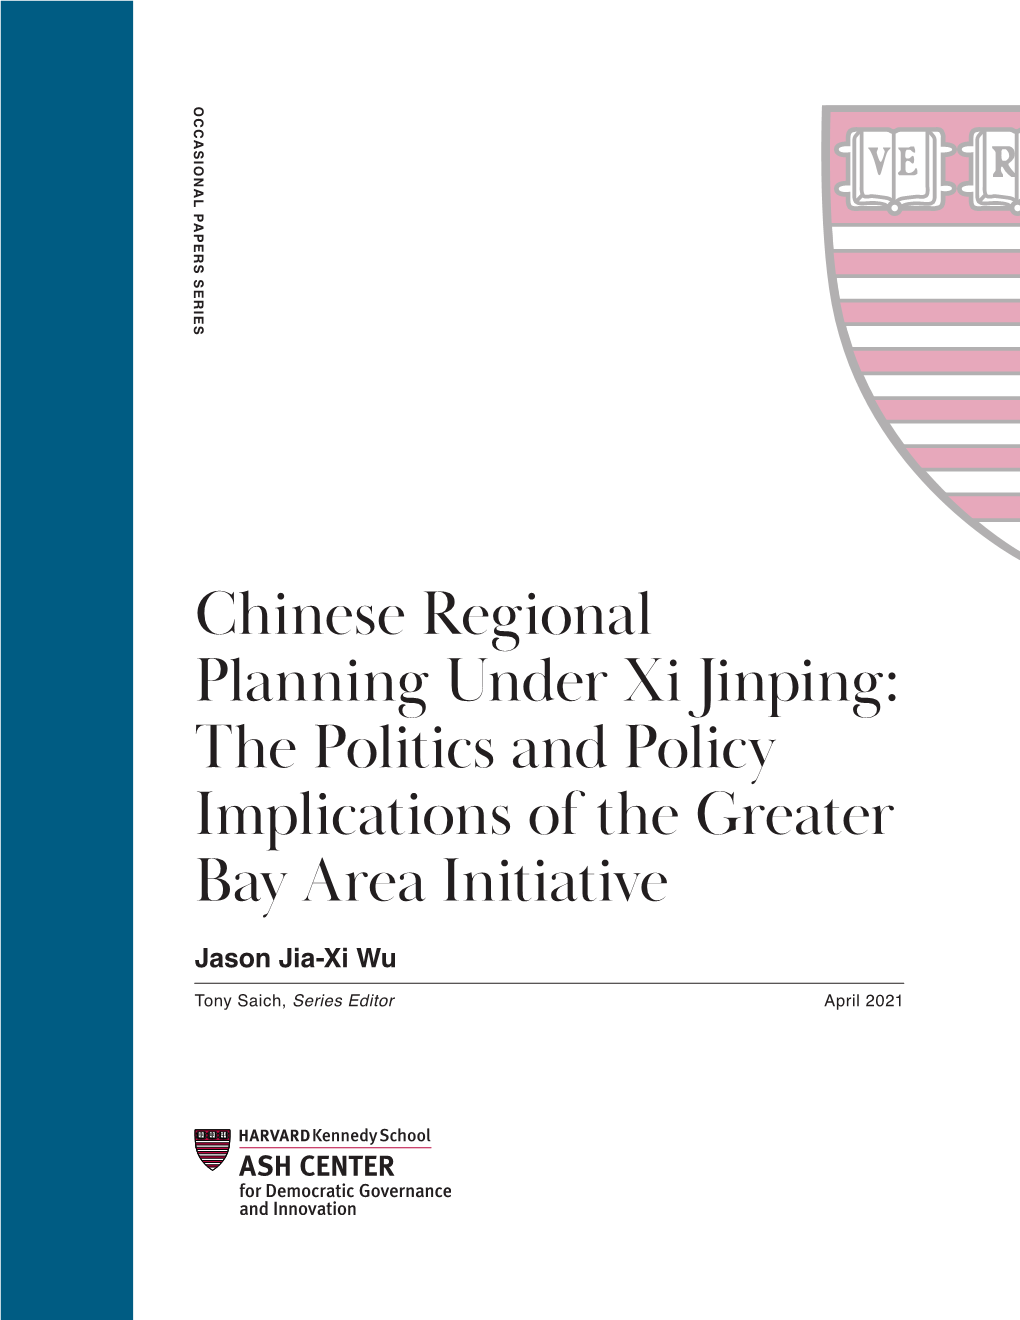 Chinese Regional Planning Under Xi Jinping: the Politics and Policy Implications of the Greater Bay Area Initiative